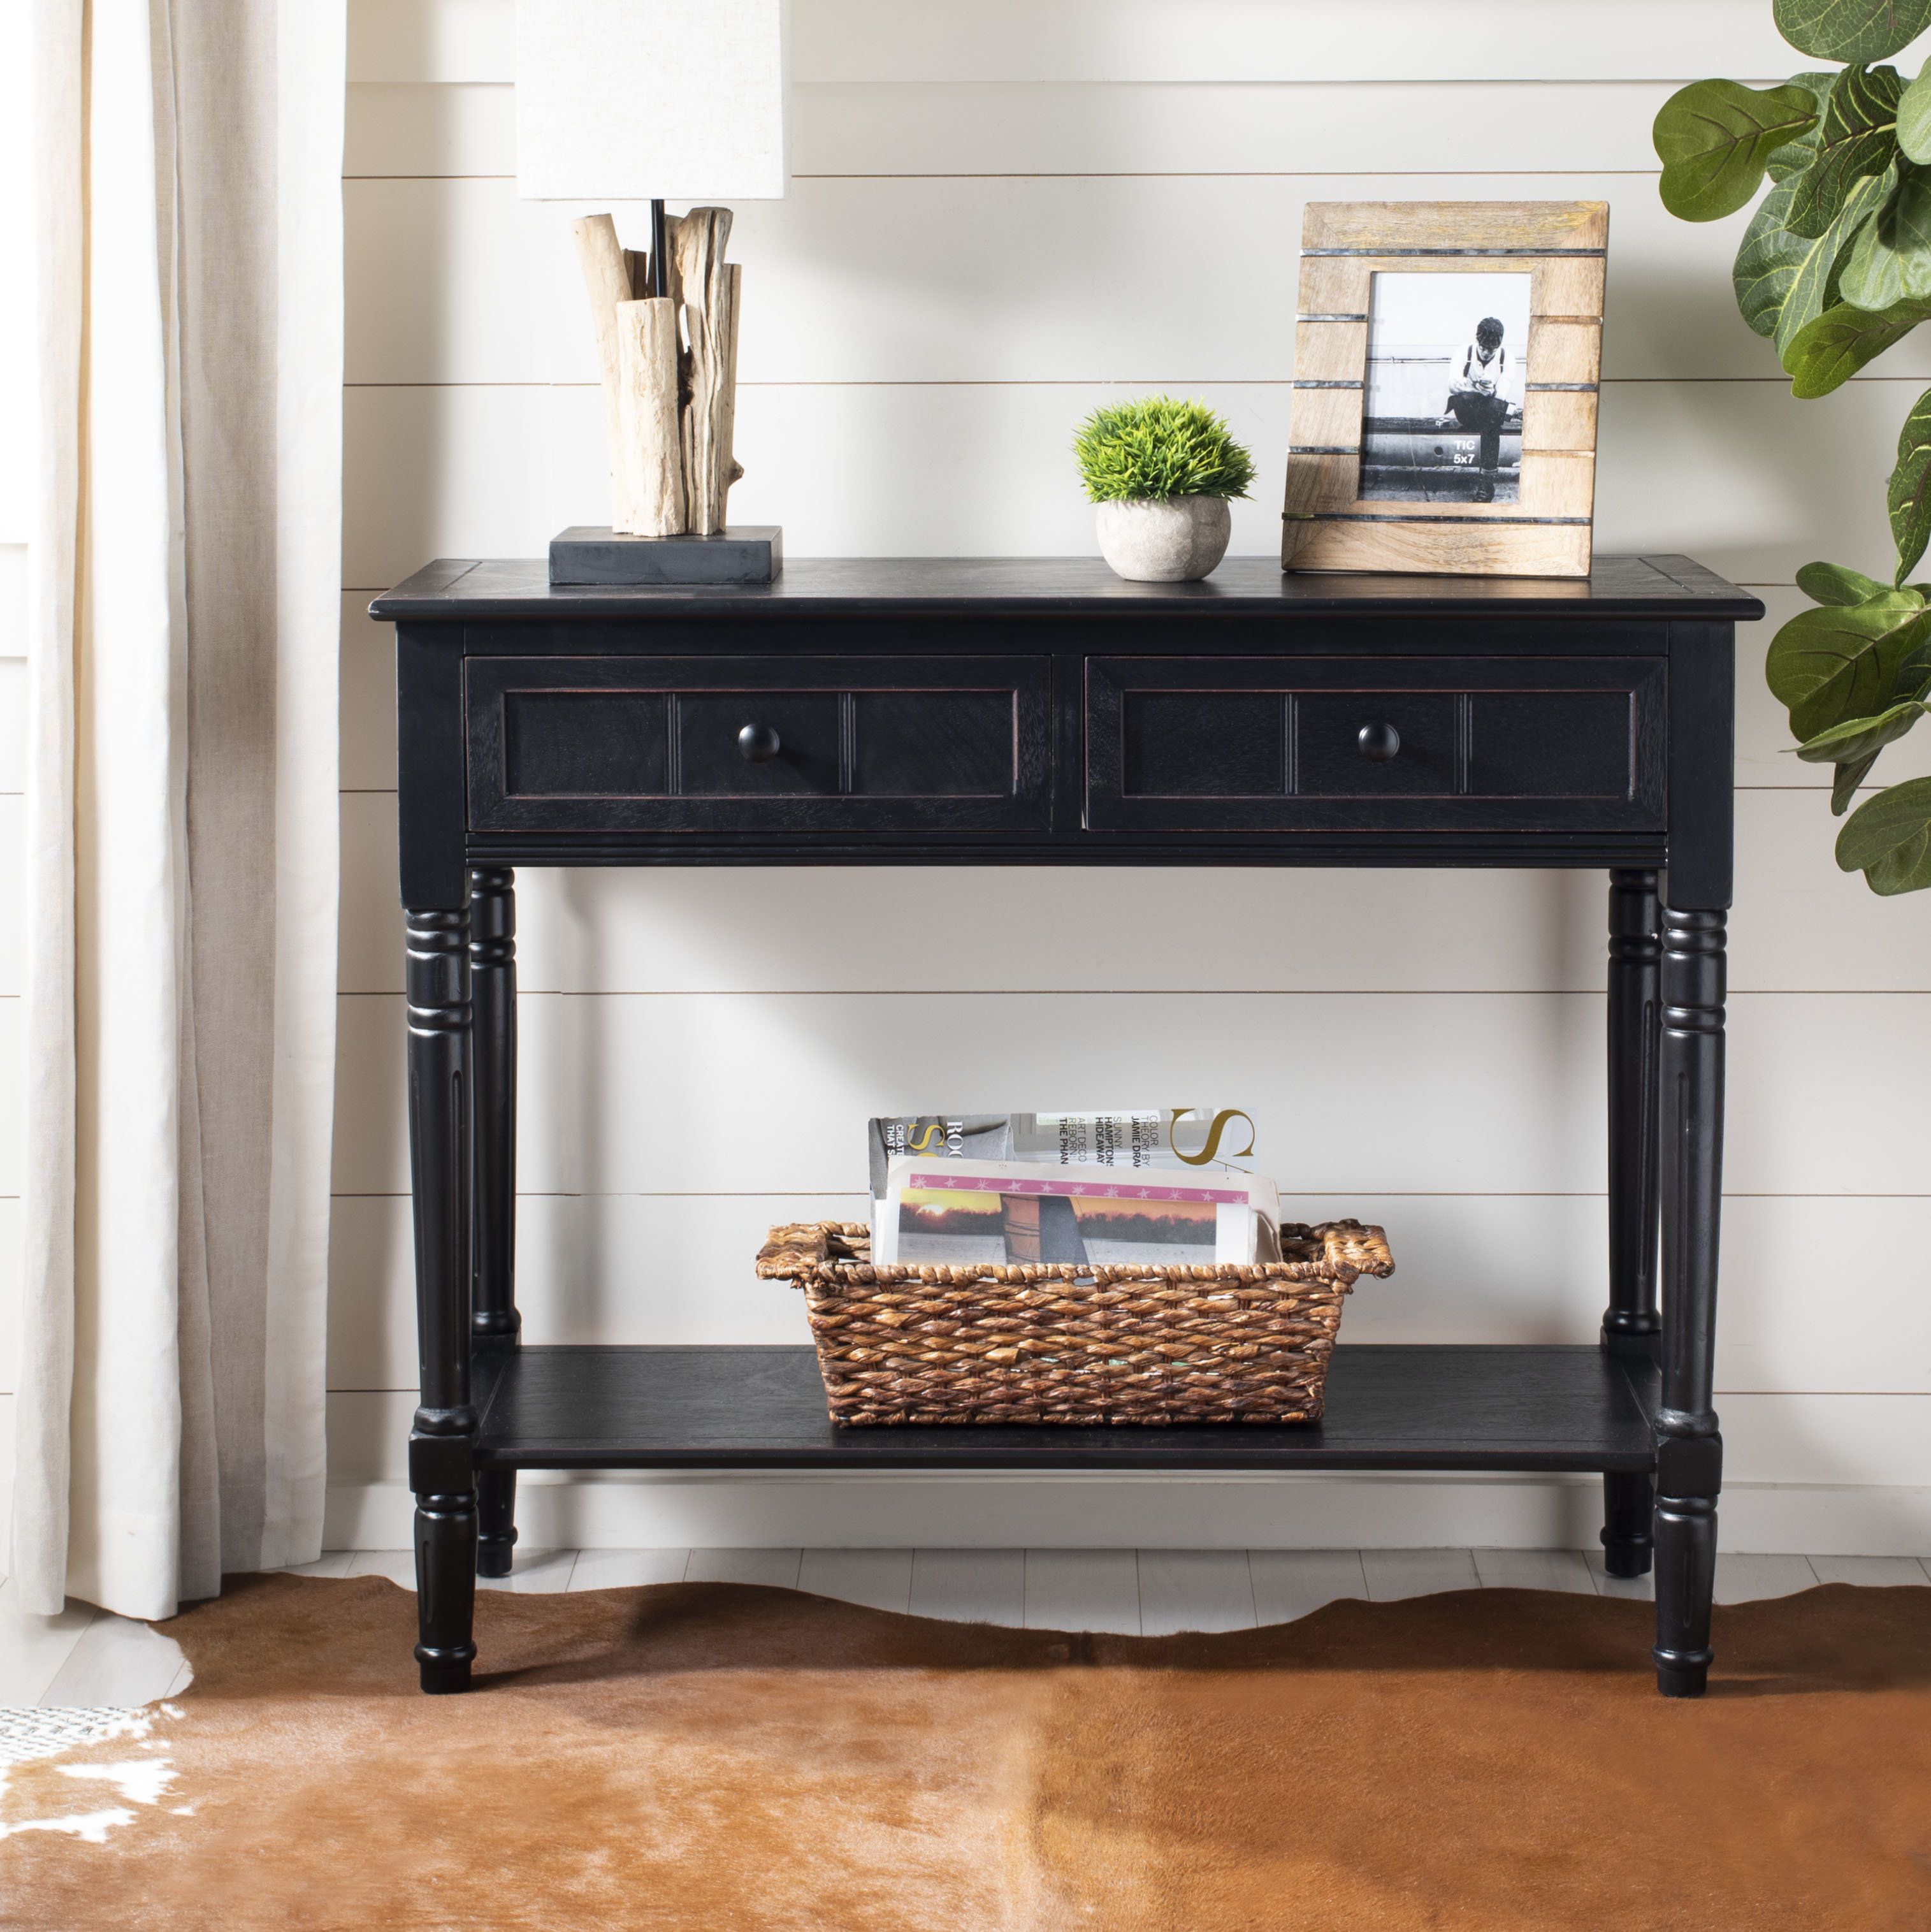 Black Console Tables You'll Love | Wayfair With Regard To Ventana Display Console Tables (View 27 of 30)